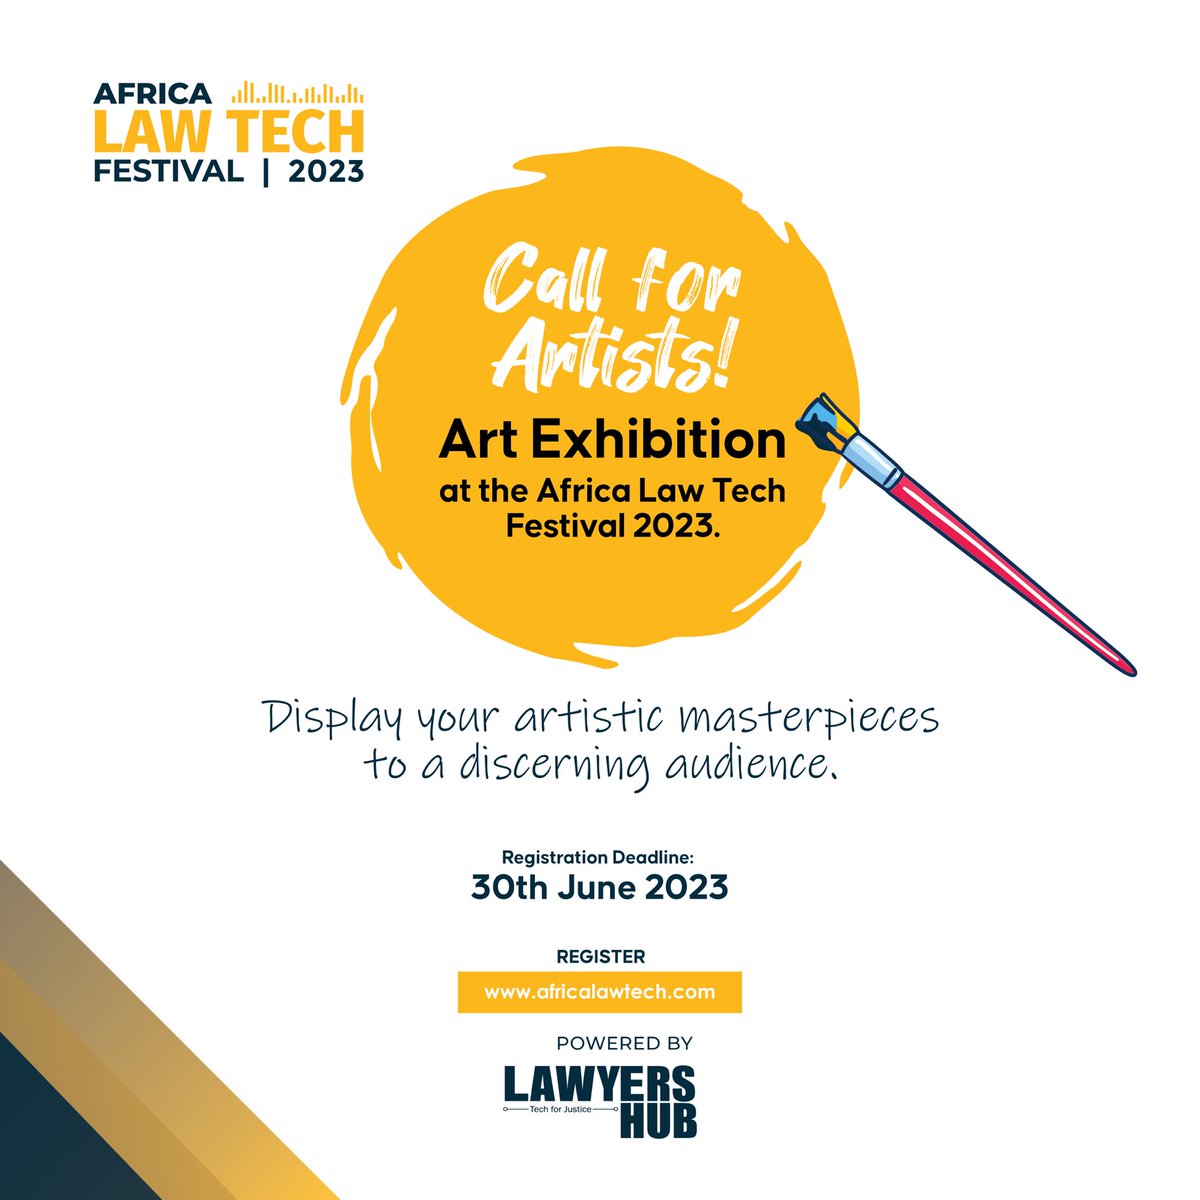 Are you an artist looking for an incredible platform to exhibit your art? 

Join us at the Africa Law & Tech Festival 2023 Art Exhibition & let your imagination come to life. Register before June 30th!

🔗 Visit the Exhibit tab at africalawtech.com to learn more & apply